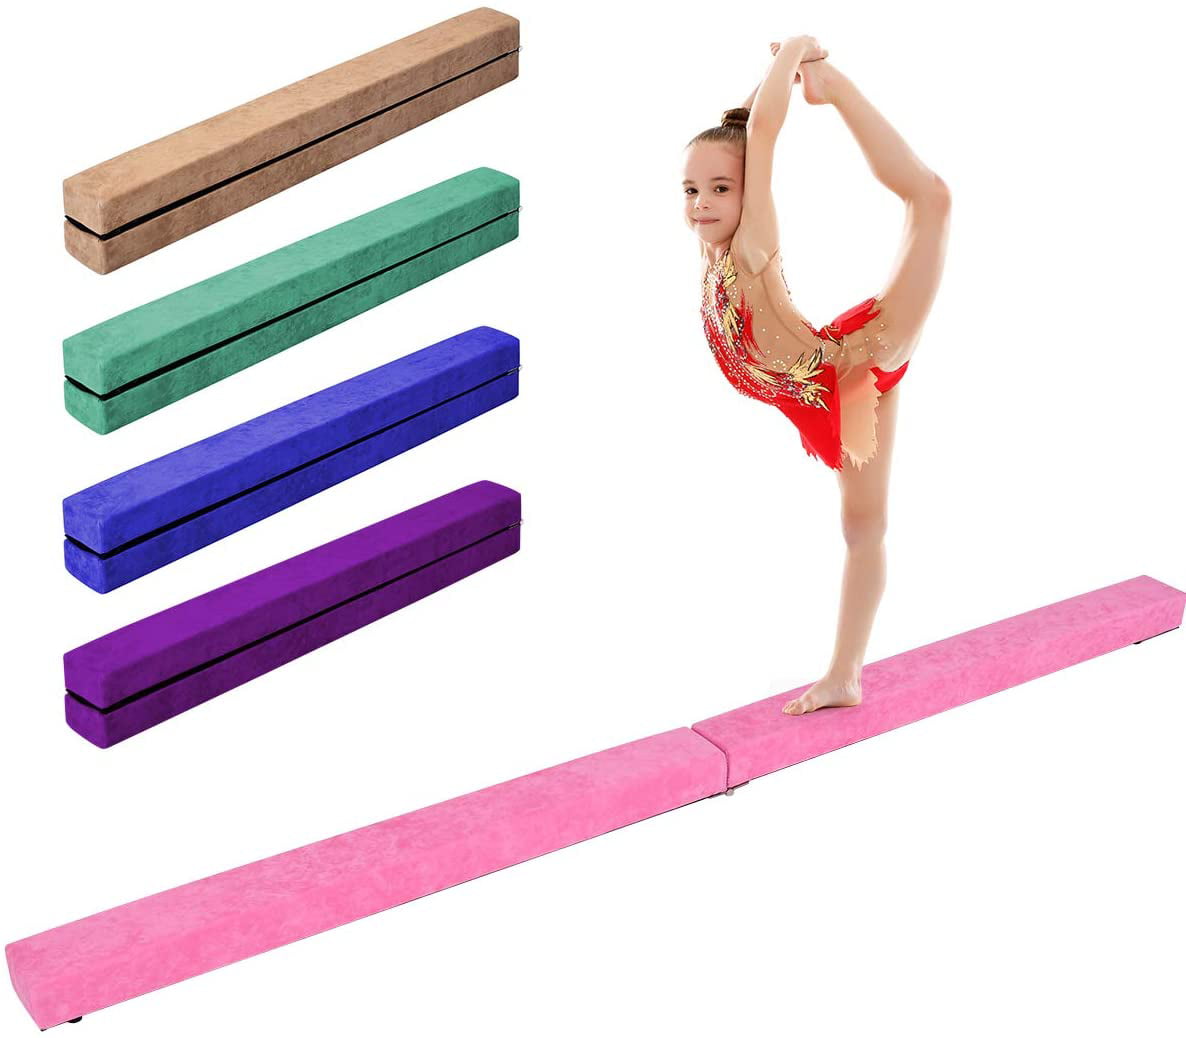 Folding and Easy to Store Juperbsky 8ft Balance Beam for Kids Gymnastics Practice Floor Gym Equipment for Teens Hone Skills at Home Non Slip 